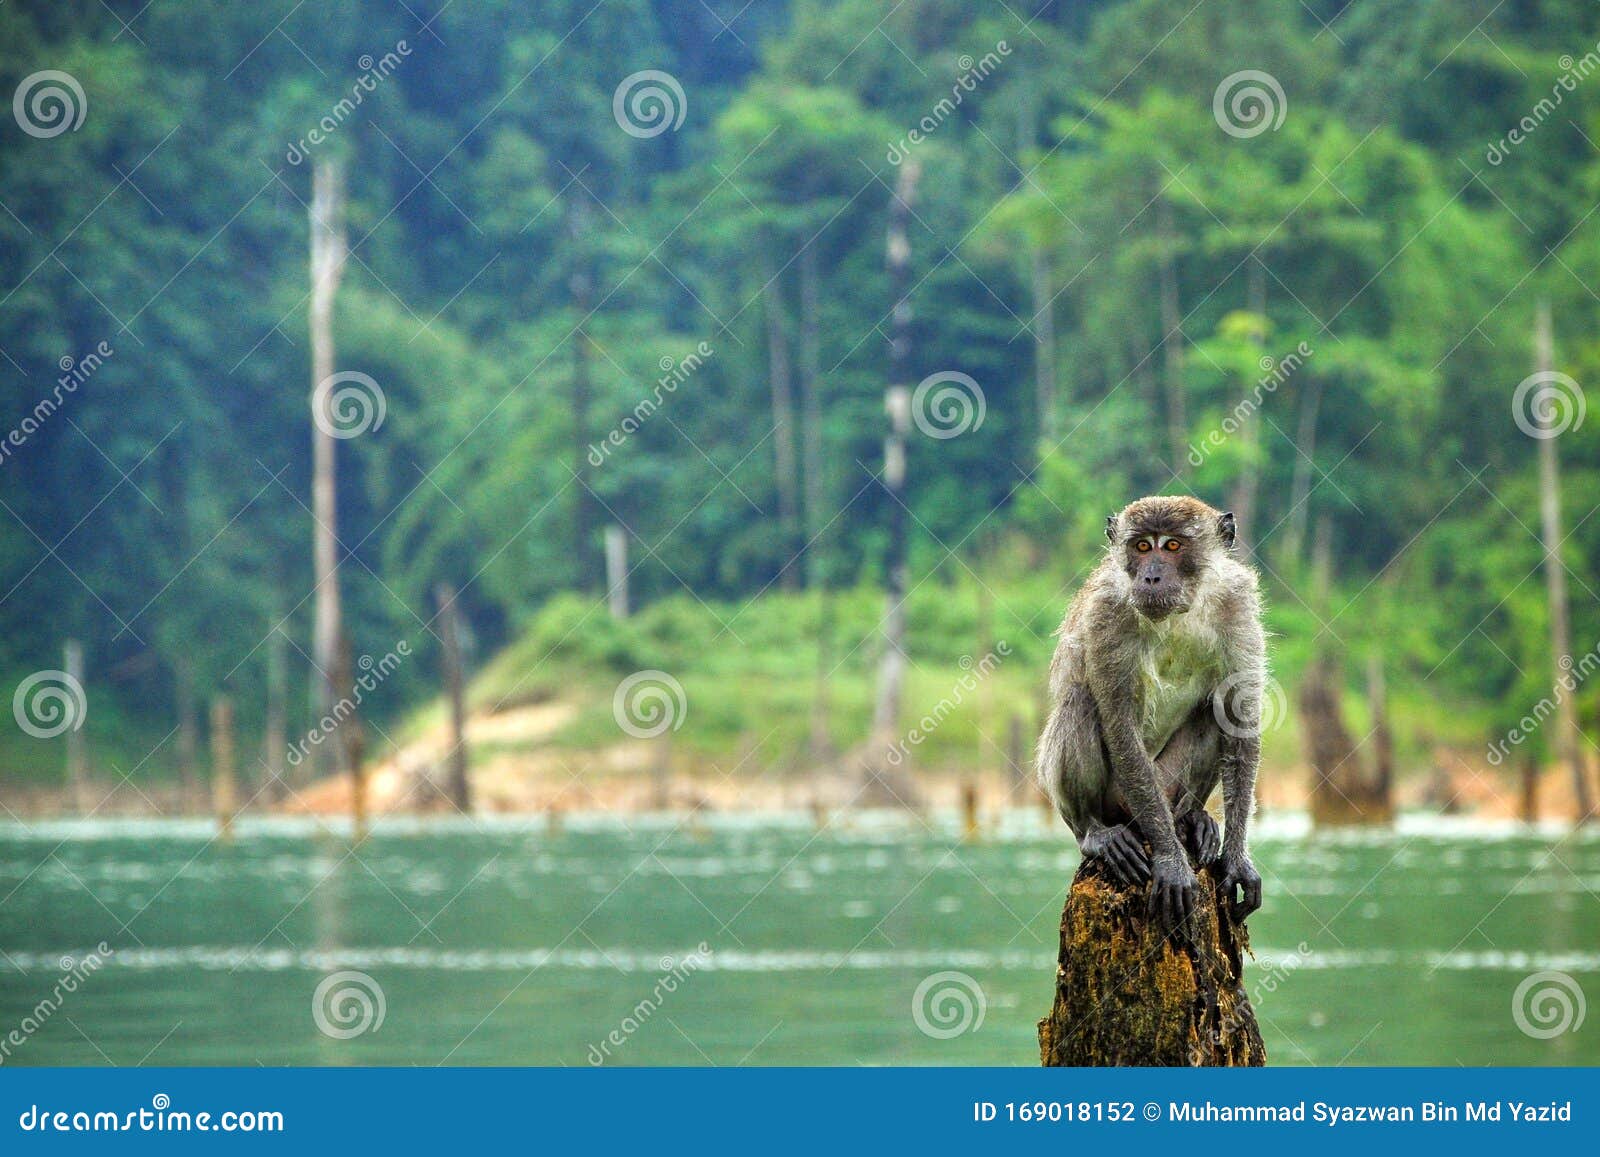 a monkey is resting after a bath in the lake.